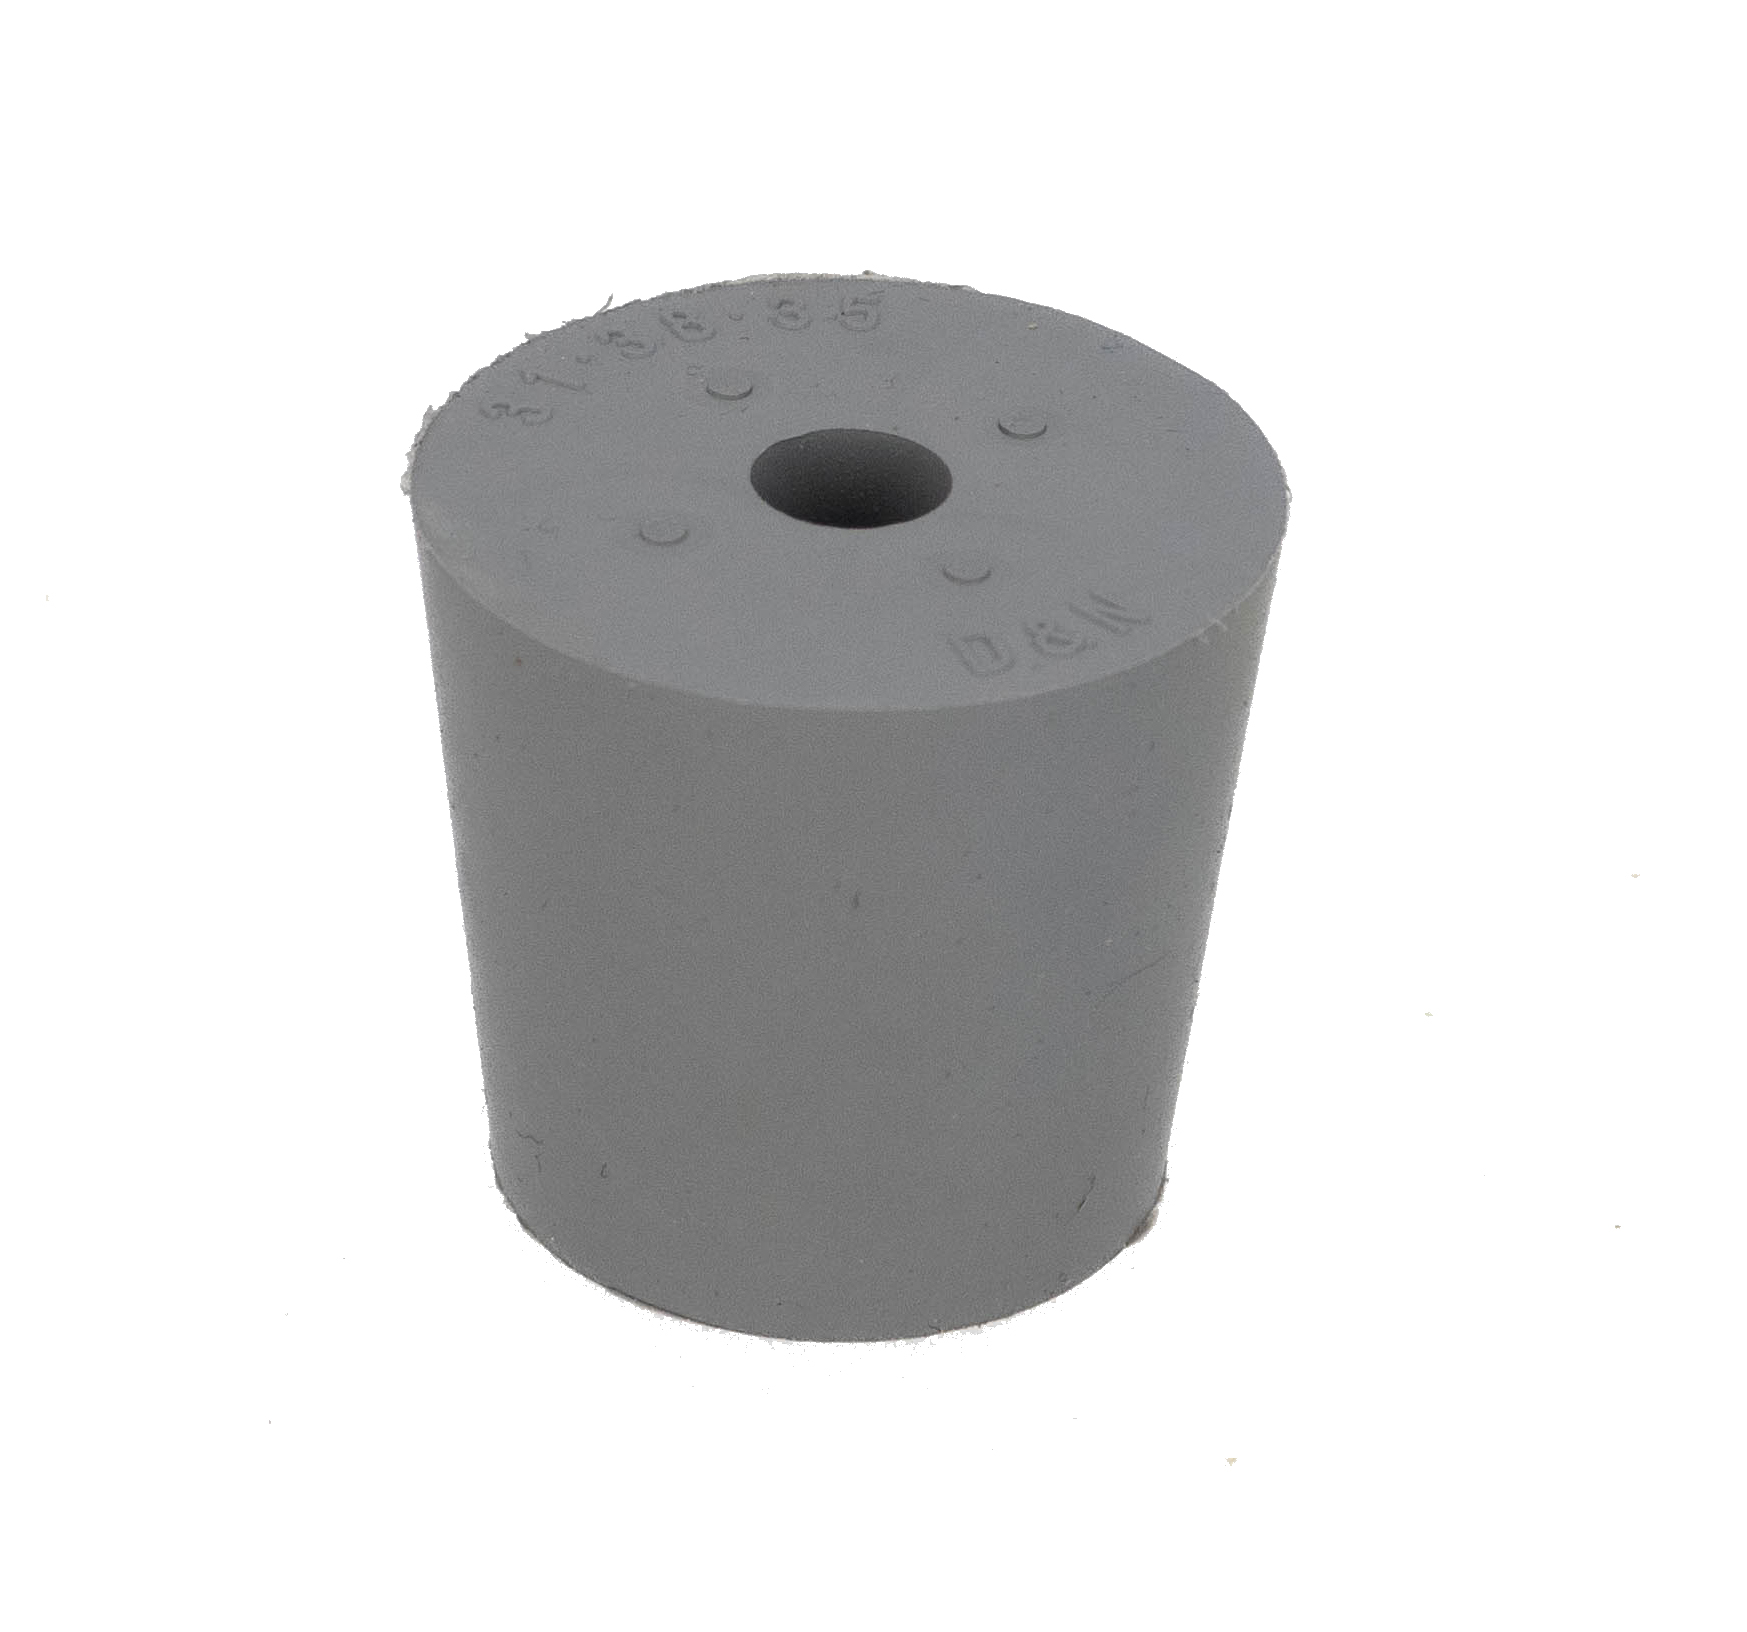 Rubber stopper grey 31 x 38 mm with hole 9 mm